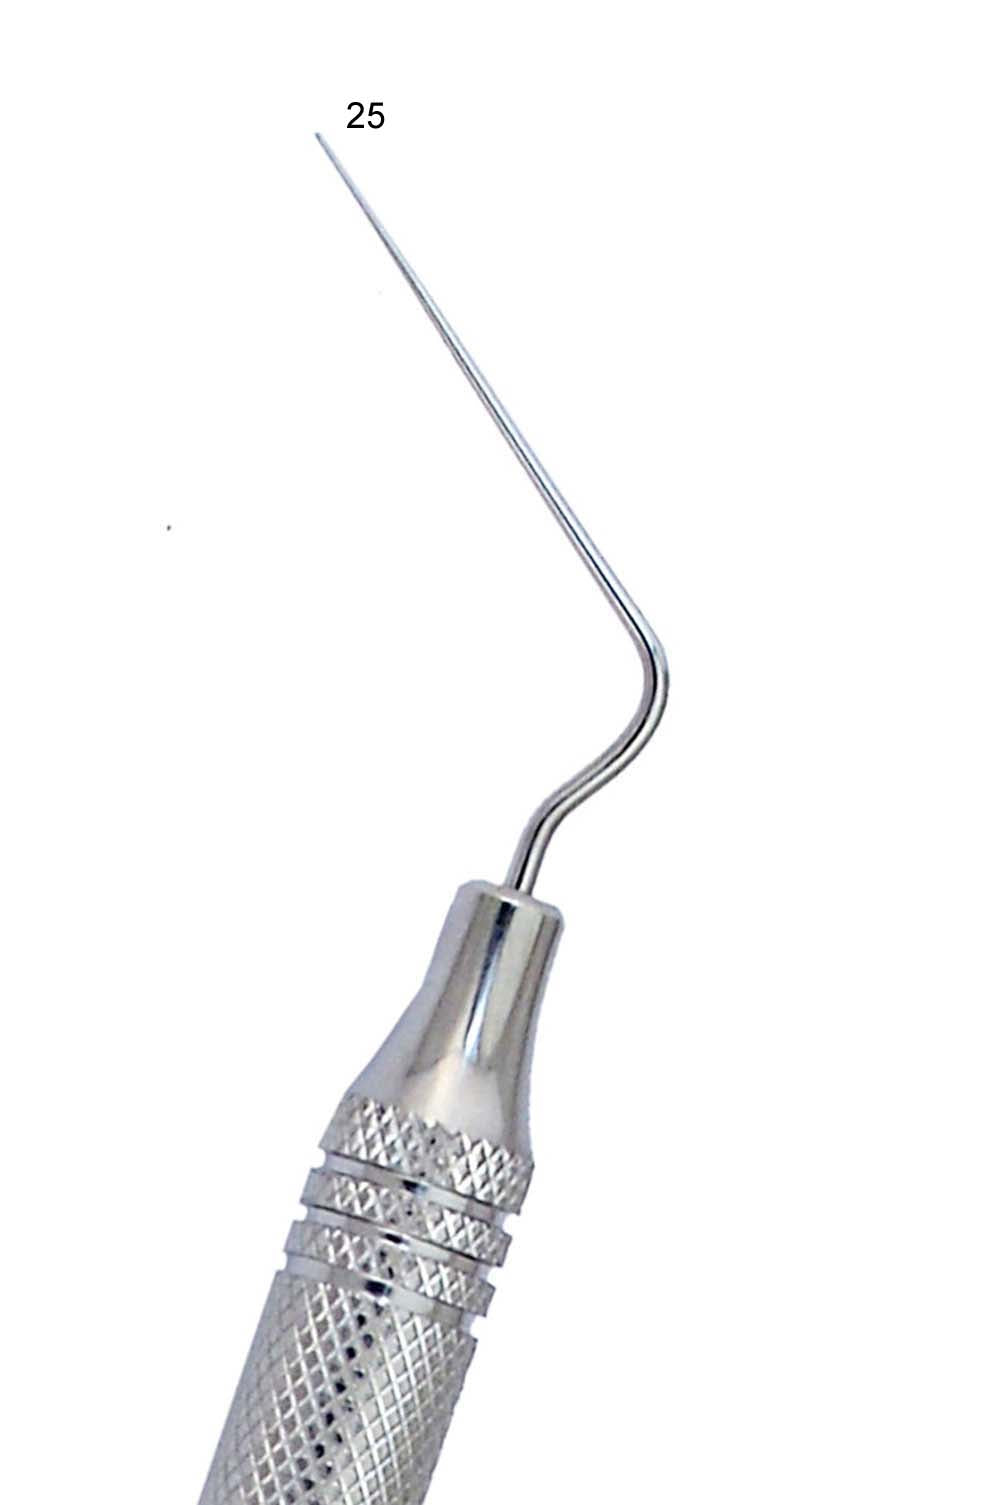 Root Canal Spreader .25